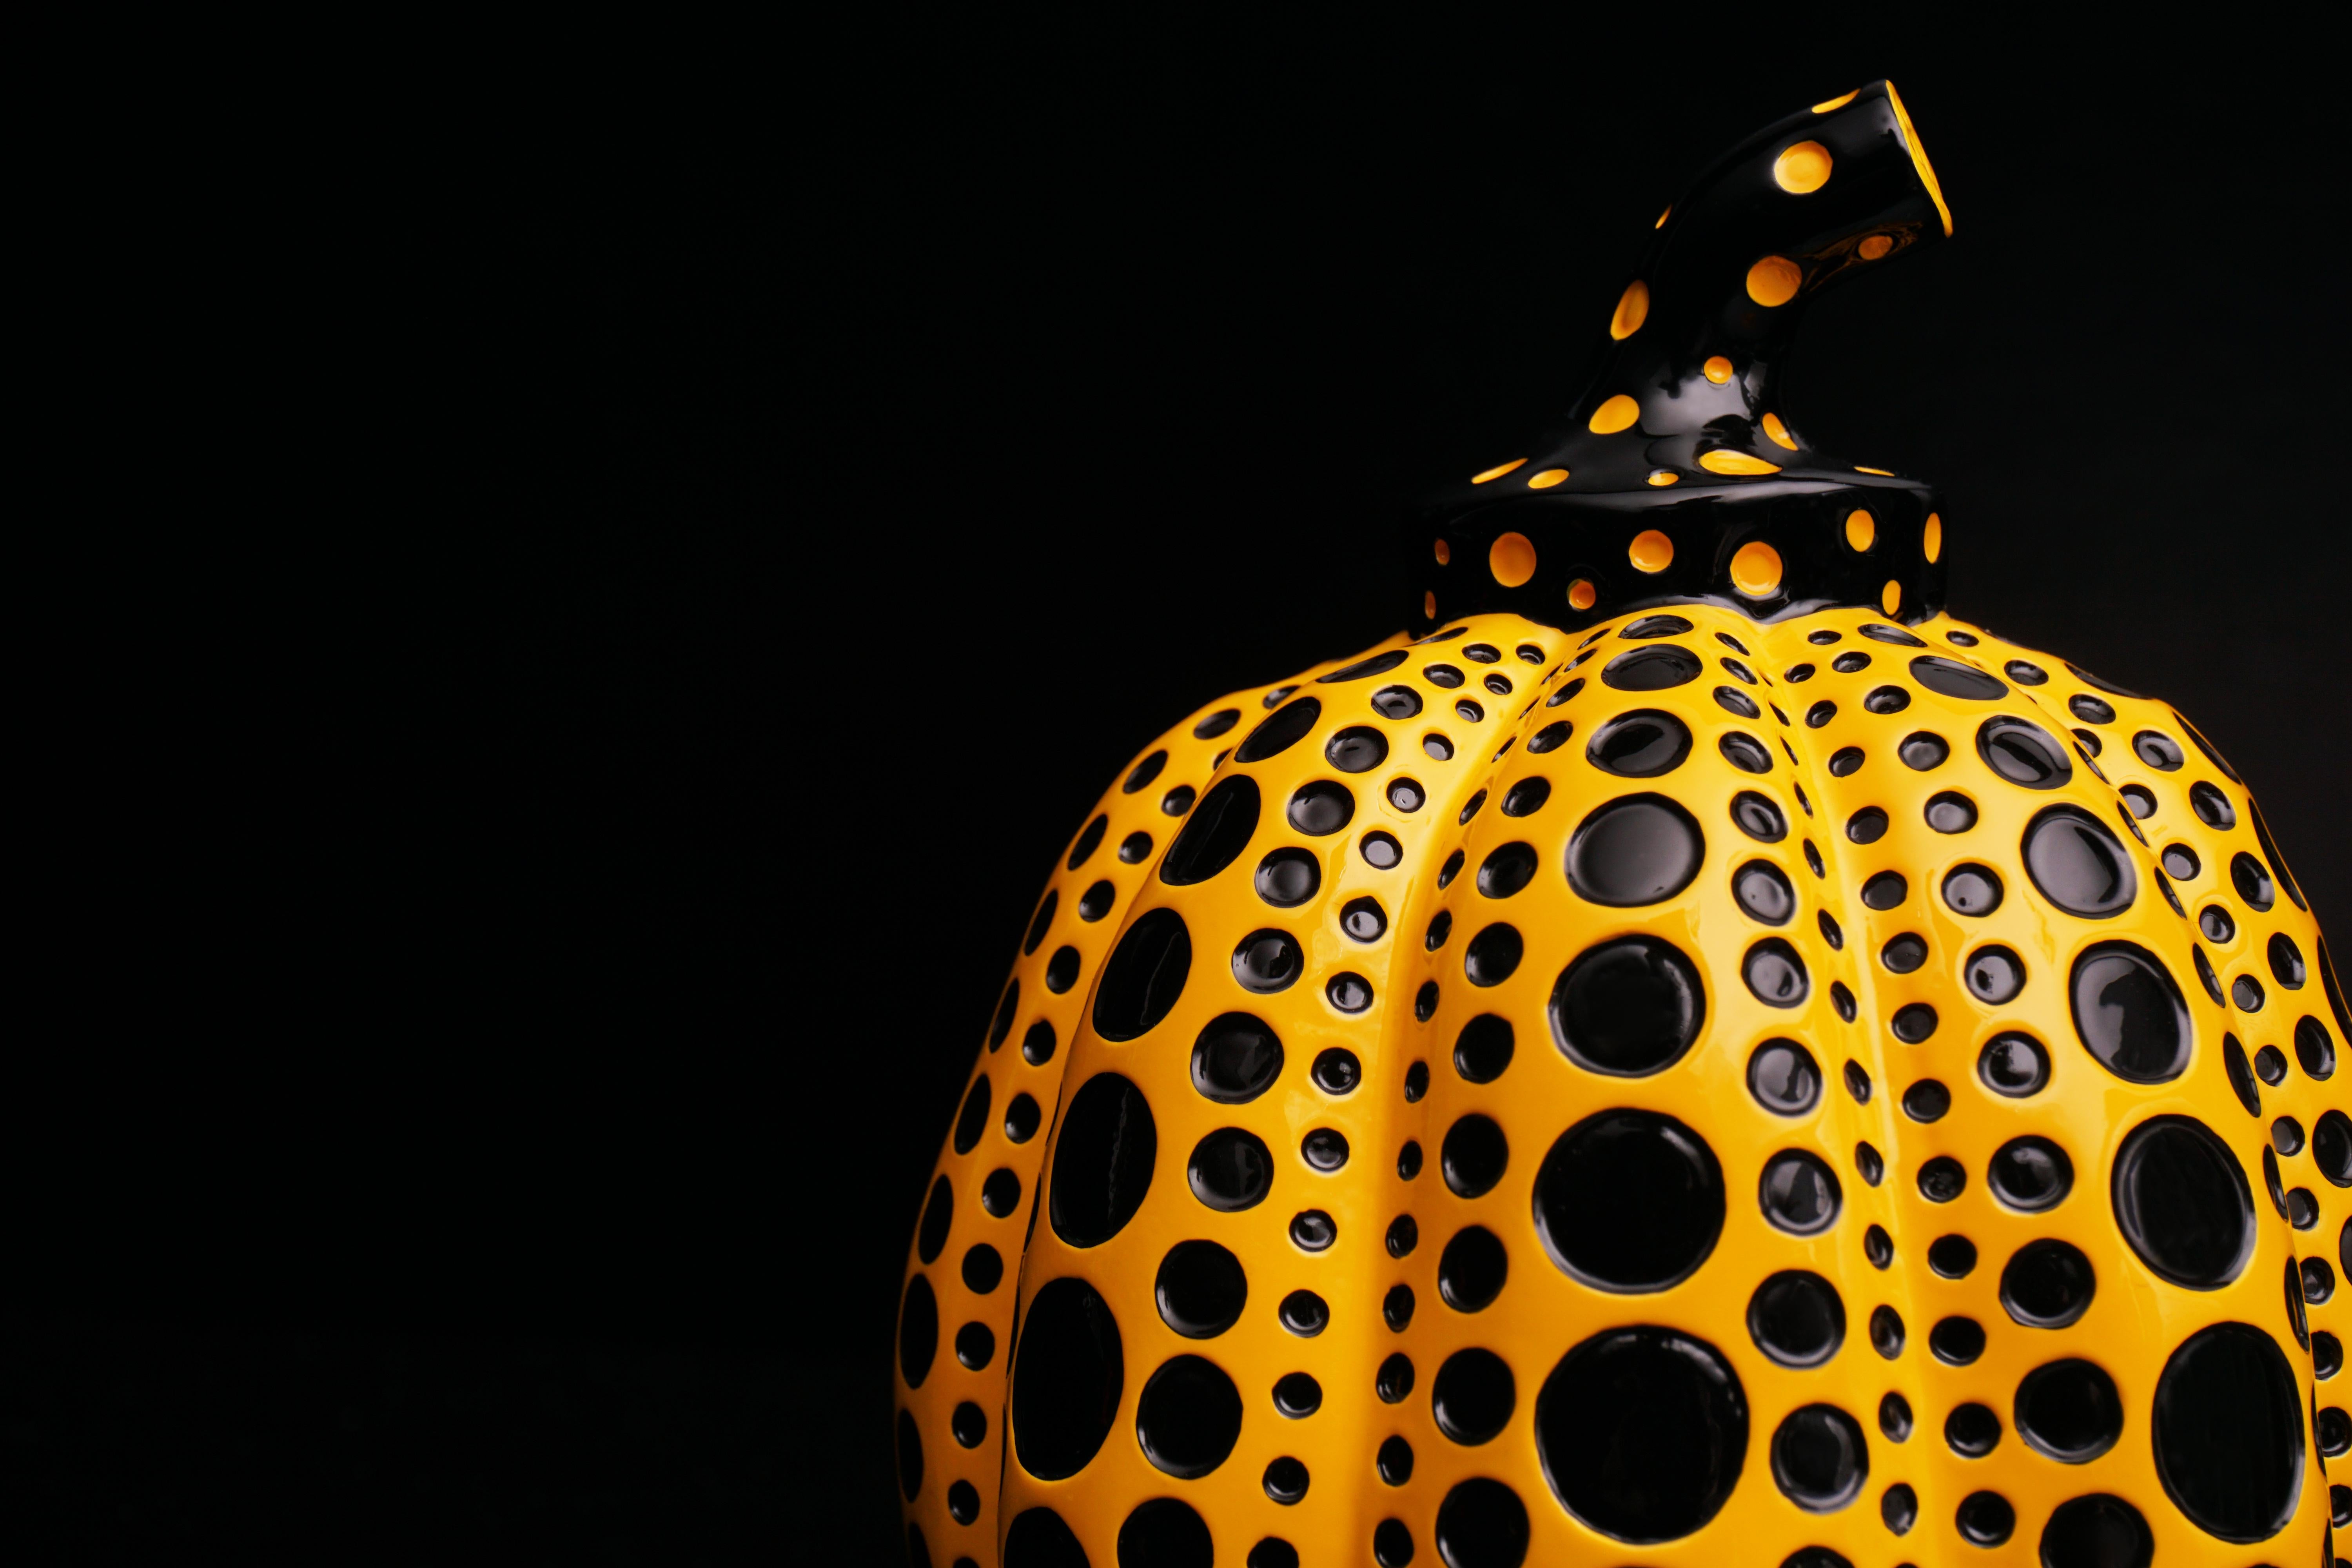 The ’Pumpkin'  sculpture is a polka-dotted painted lacquer resin collectible art object by the legendary contemporary Artist, Yayoi Kusama. Created in 2016, the polka-dot pumpkin series is a quintessential example of Kusama’s iconic spot-patterned